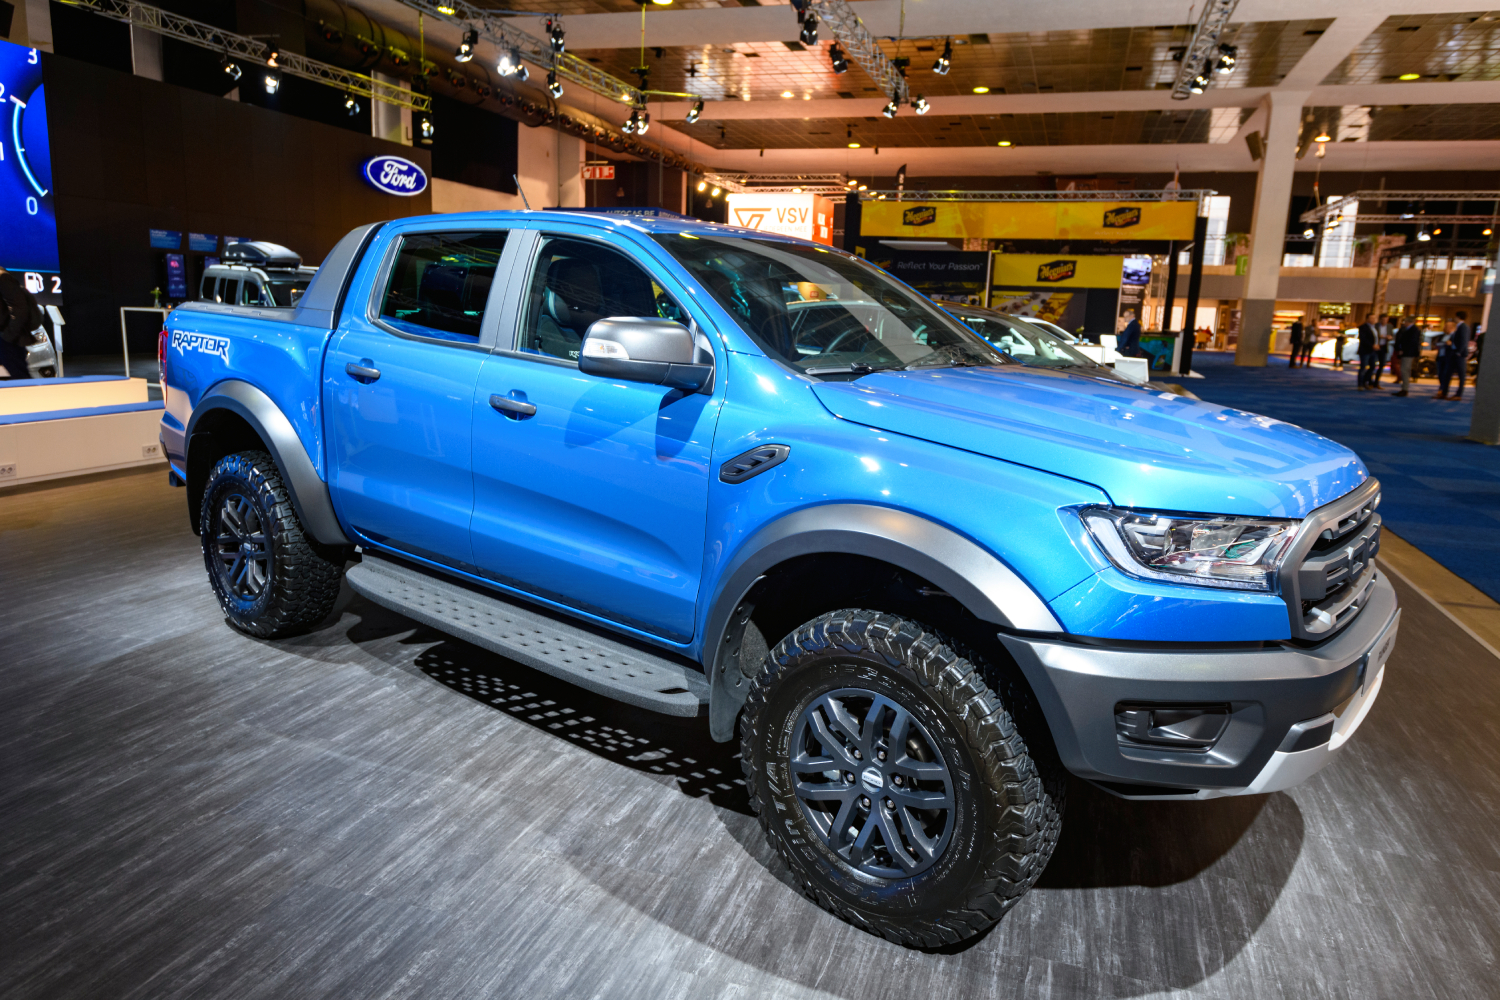 The Ford Ranger is one of Consumer Reports most reliable used pickup trucks in 2022